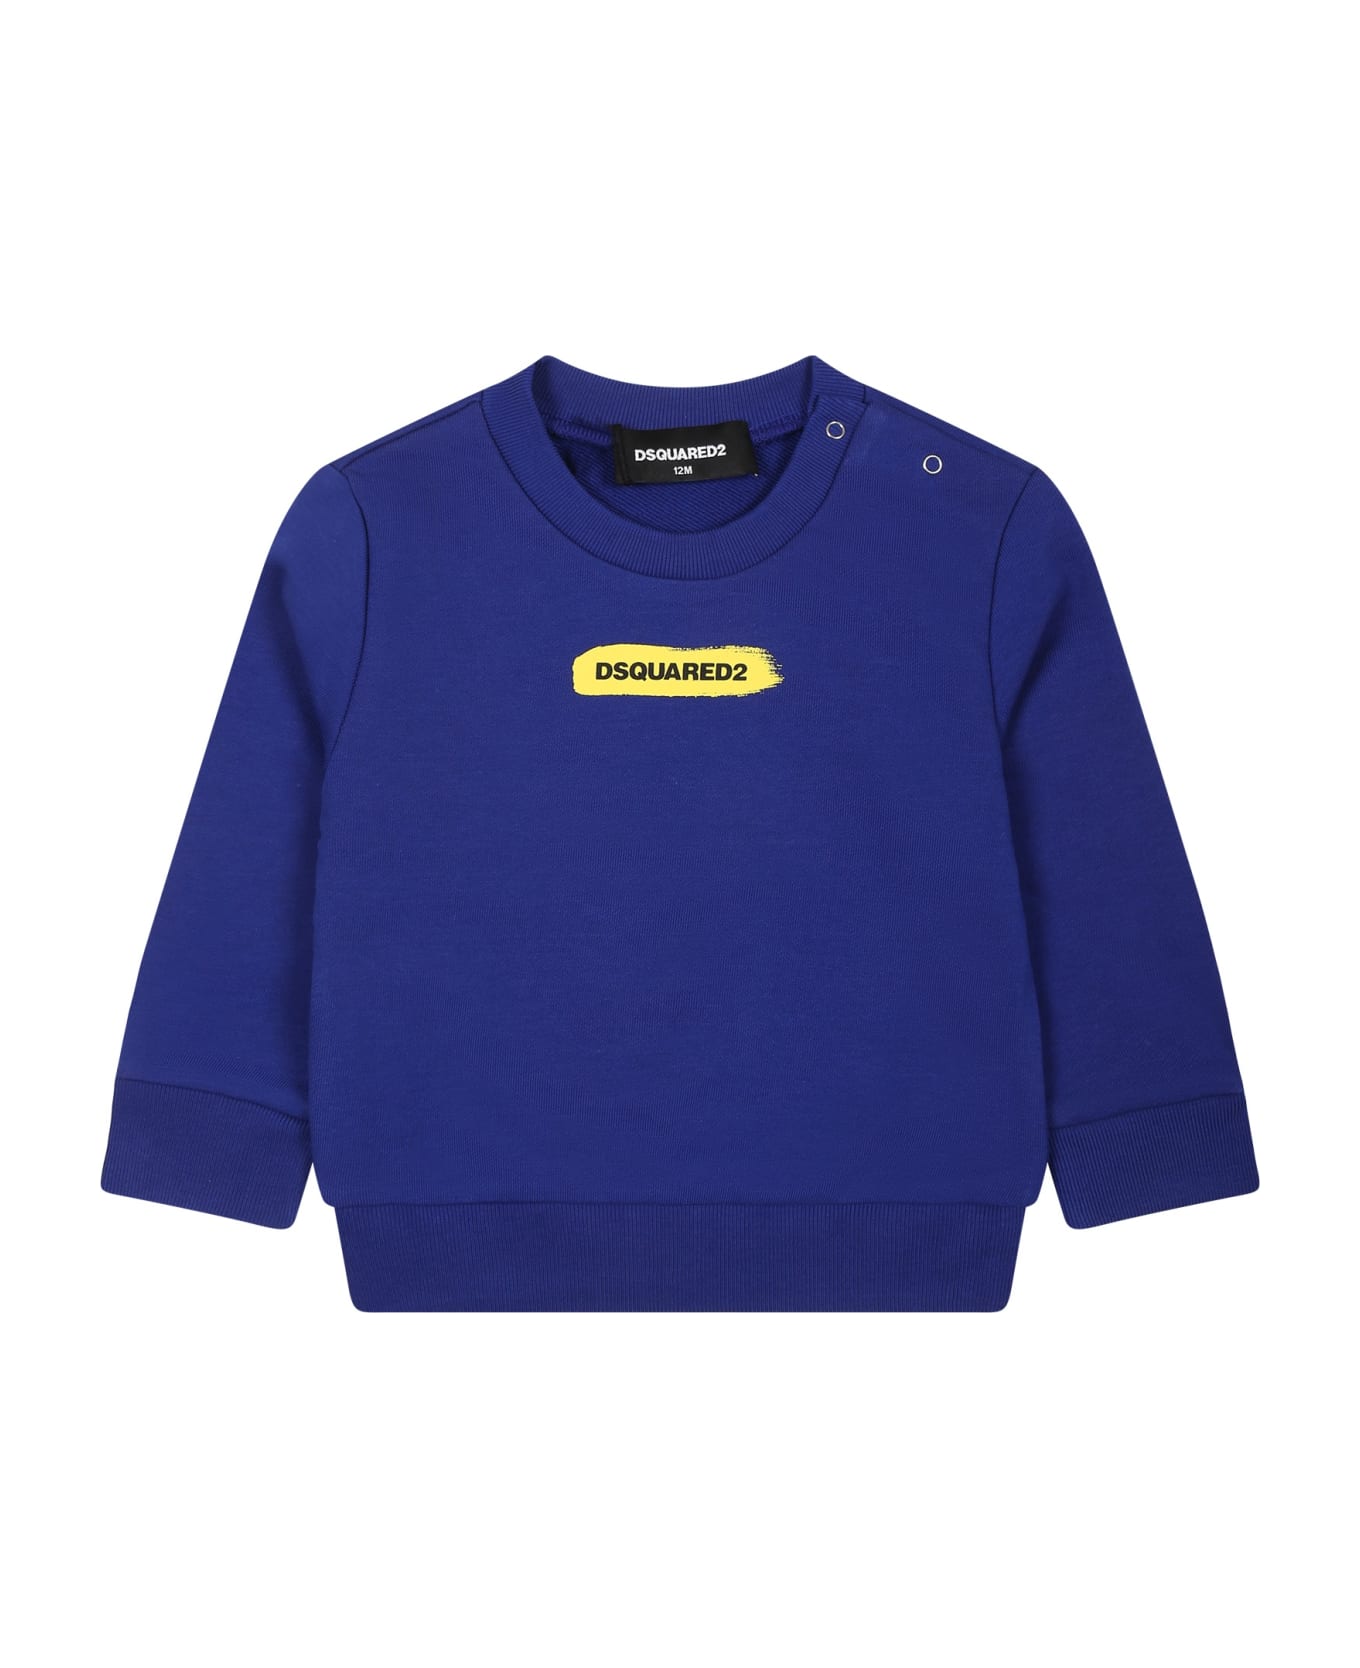 Dsquared2 Light Blue Sweatshirt For Baby Boy With Logo - Light Blue